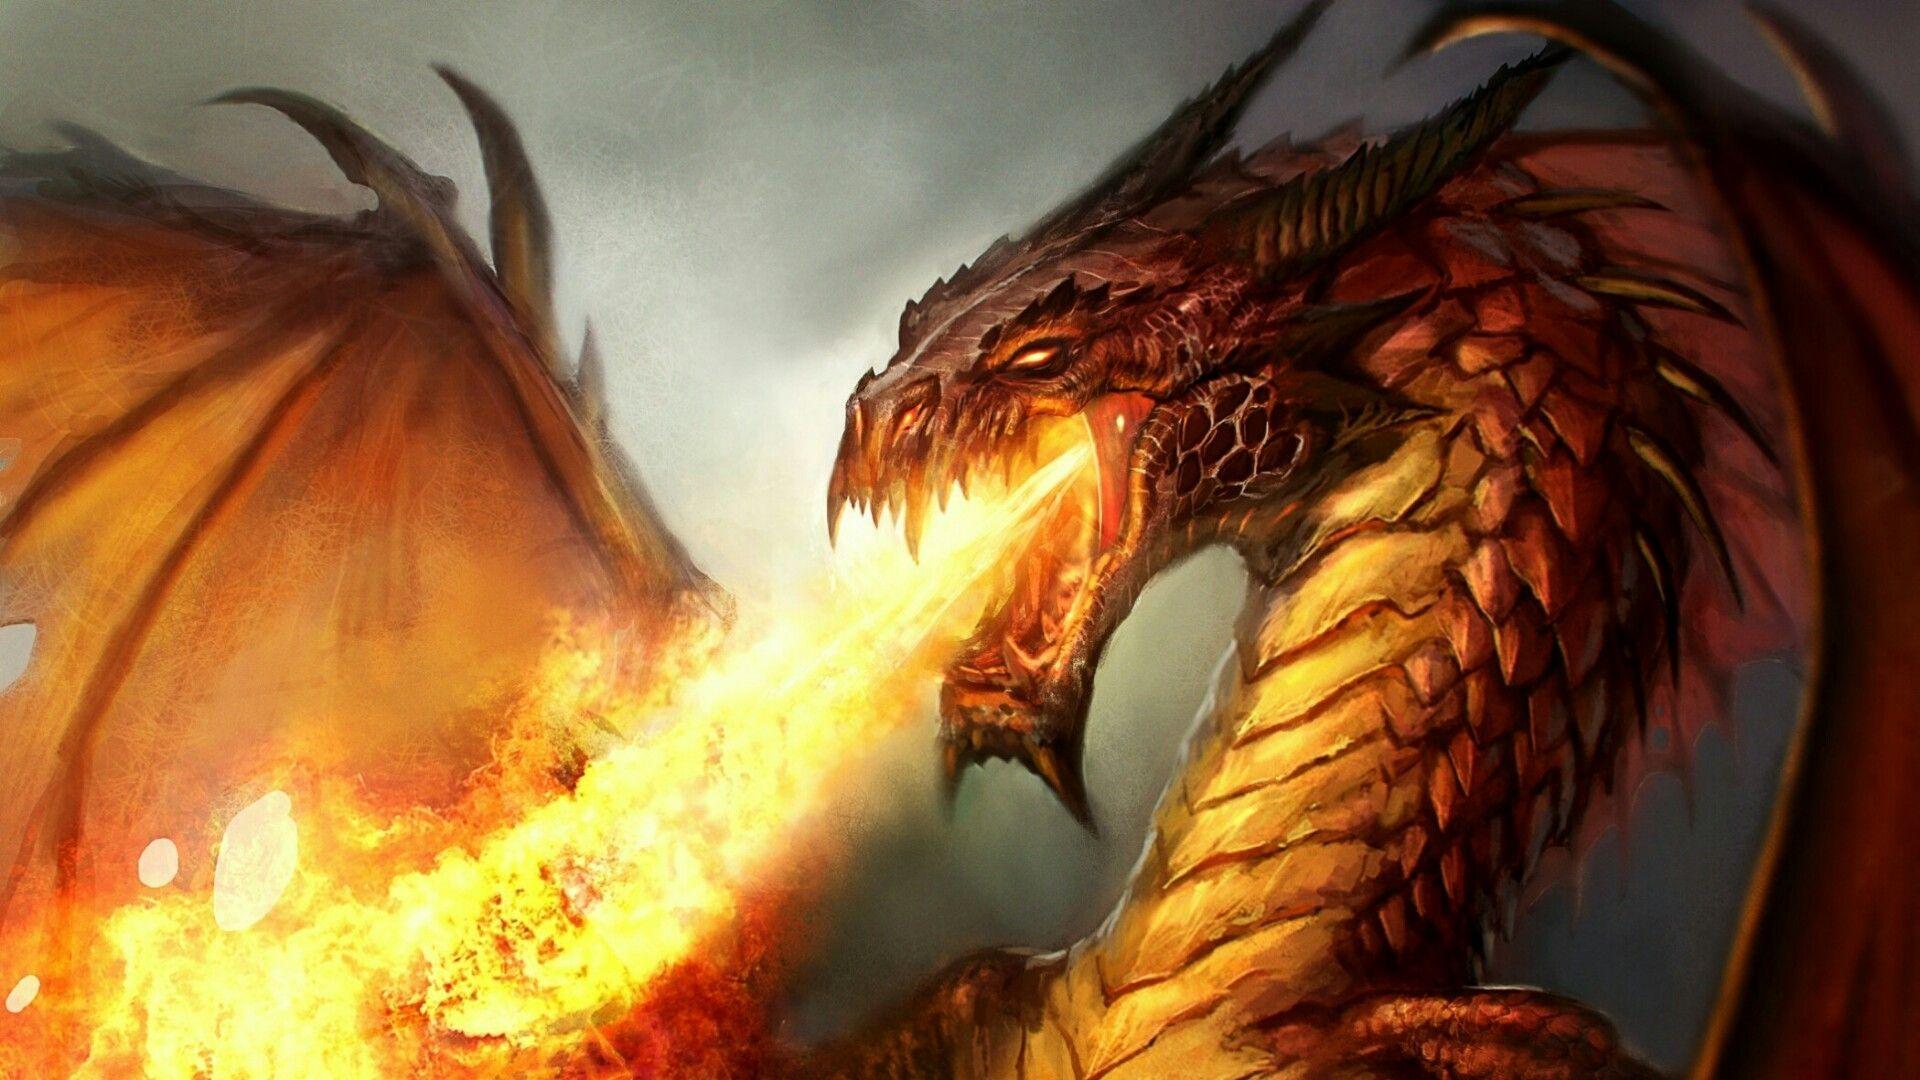 Top Fire Dragon Wallpaper 3D FULL HD 1920×1080 For PC Background